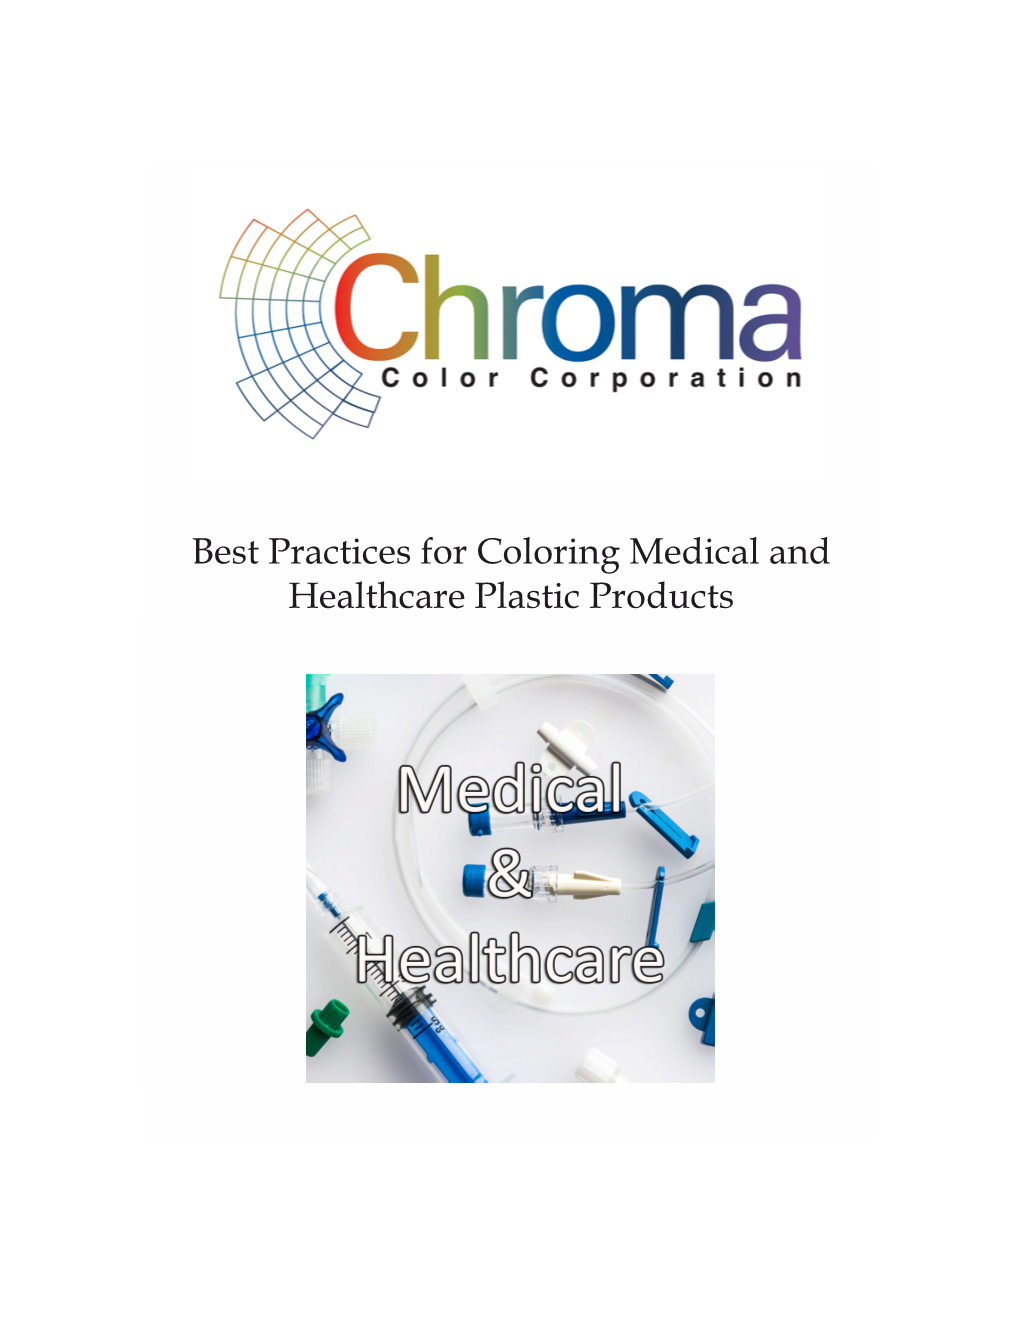 Best Practices for Coloring Medical and Healthcare Plastic Products